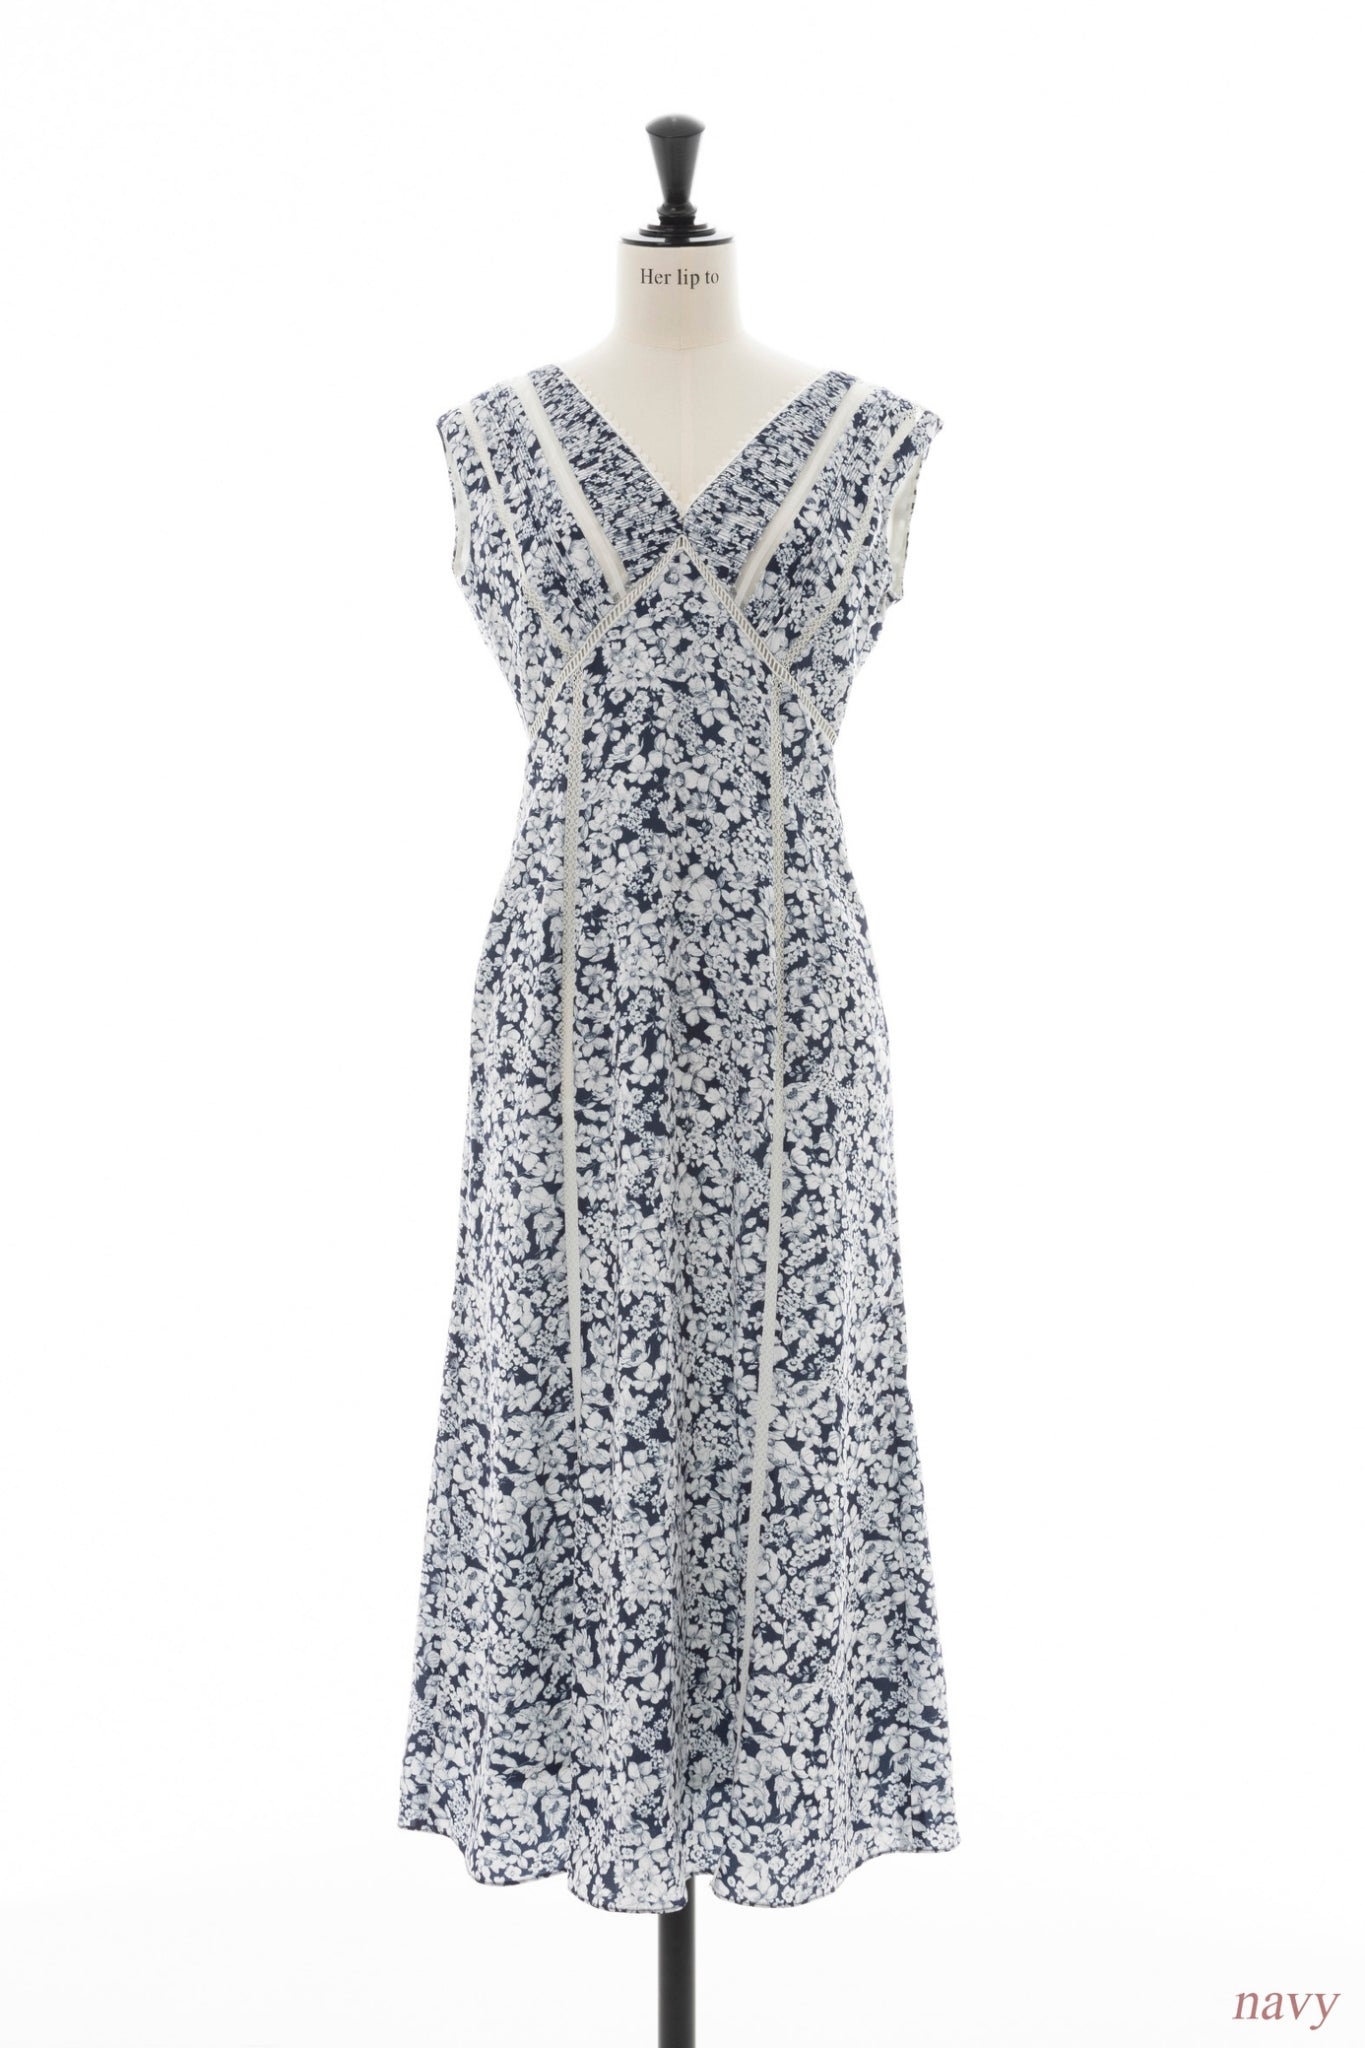 herlipto Lace Trimmed Floral Dress navy | tradexautomotive.com